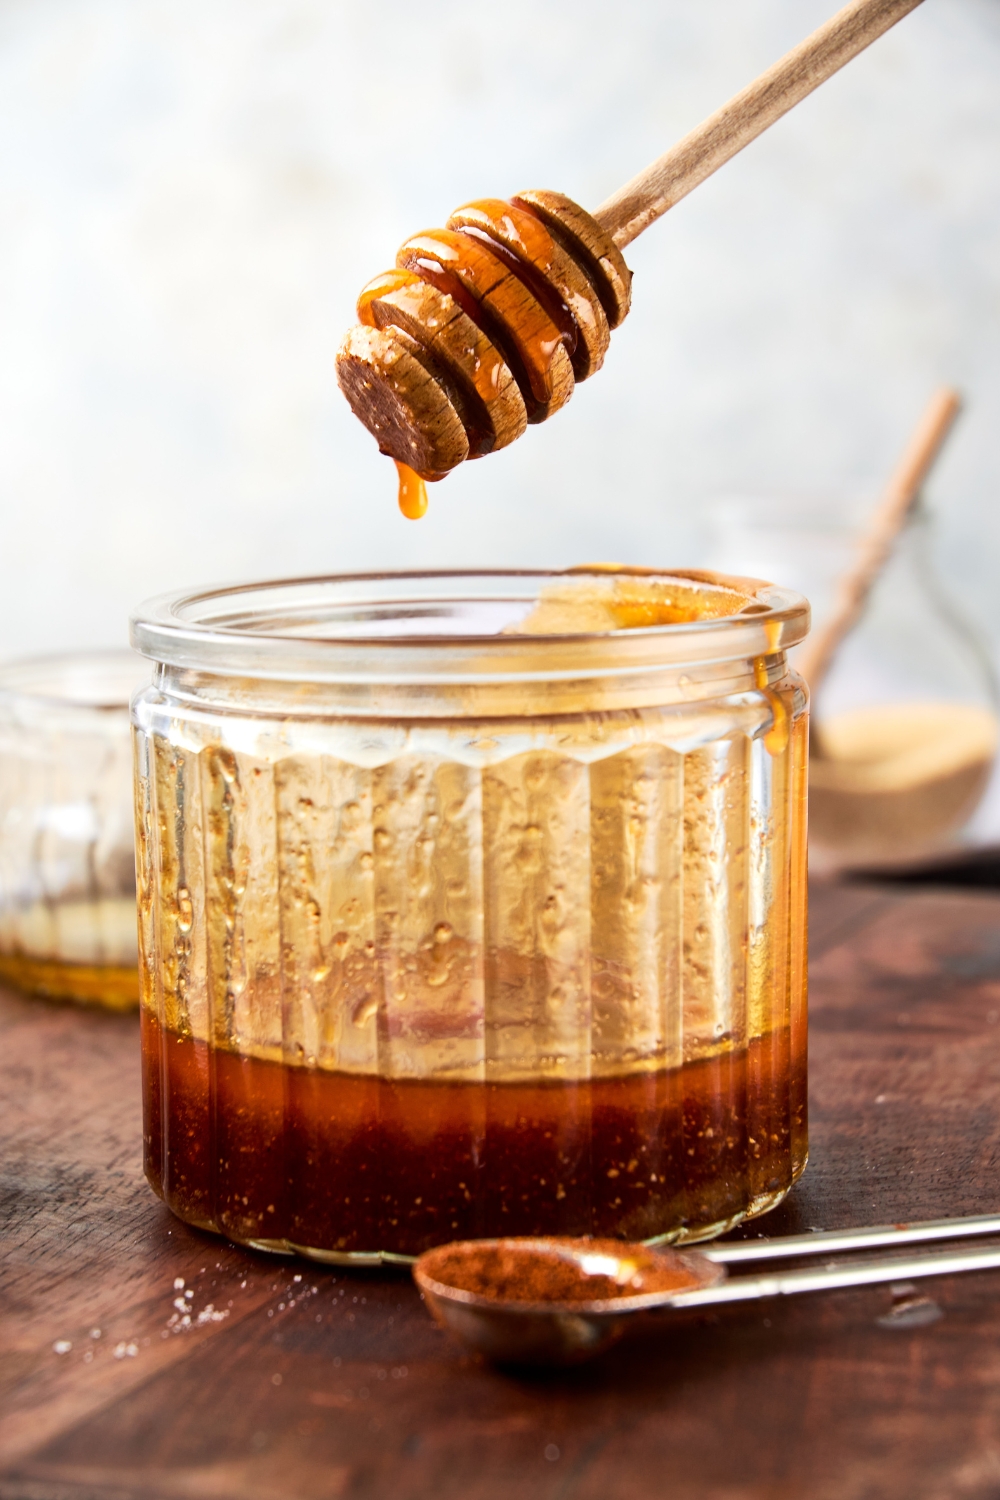 Someone holds a honey dipper over a glass jar full of hot honey.